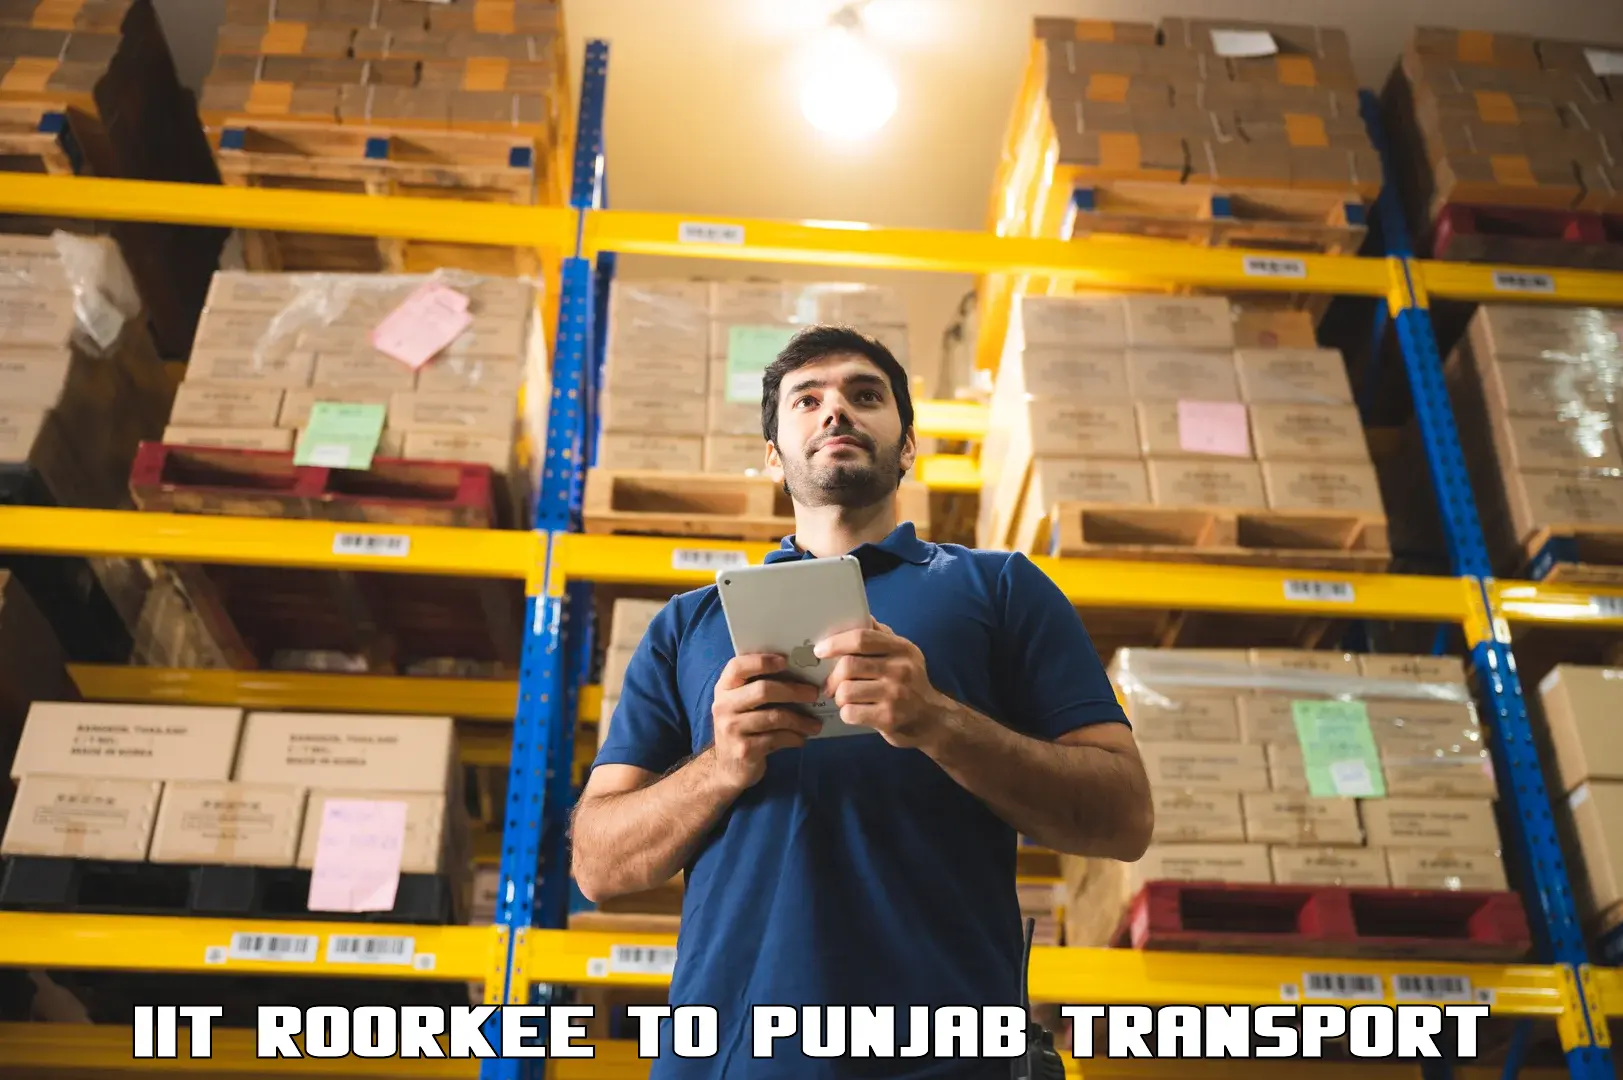 Delivery service IIT Roorkee to Punjab